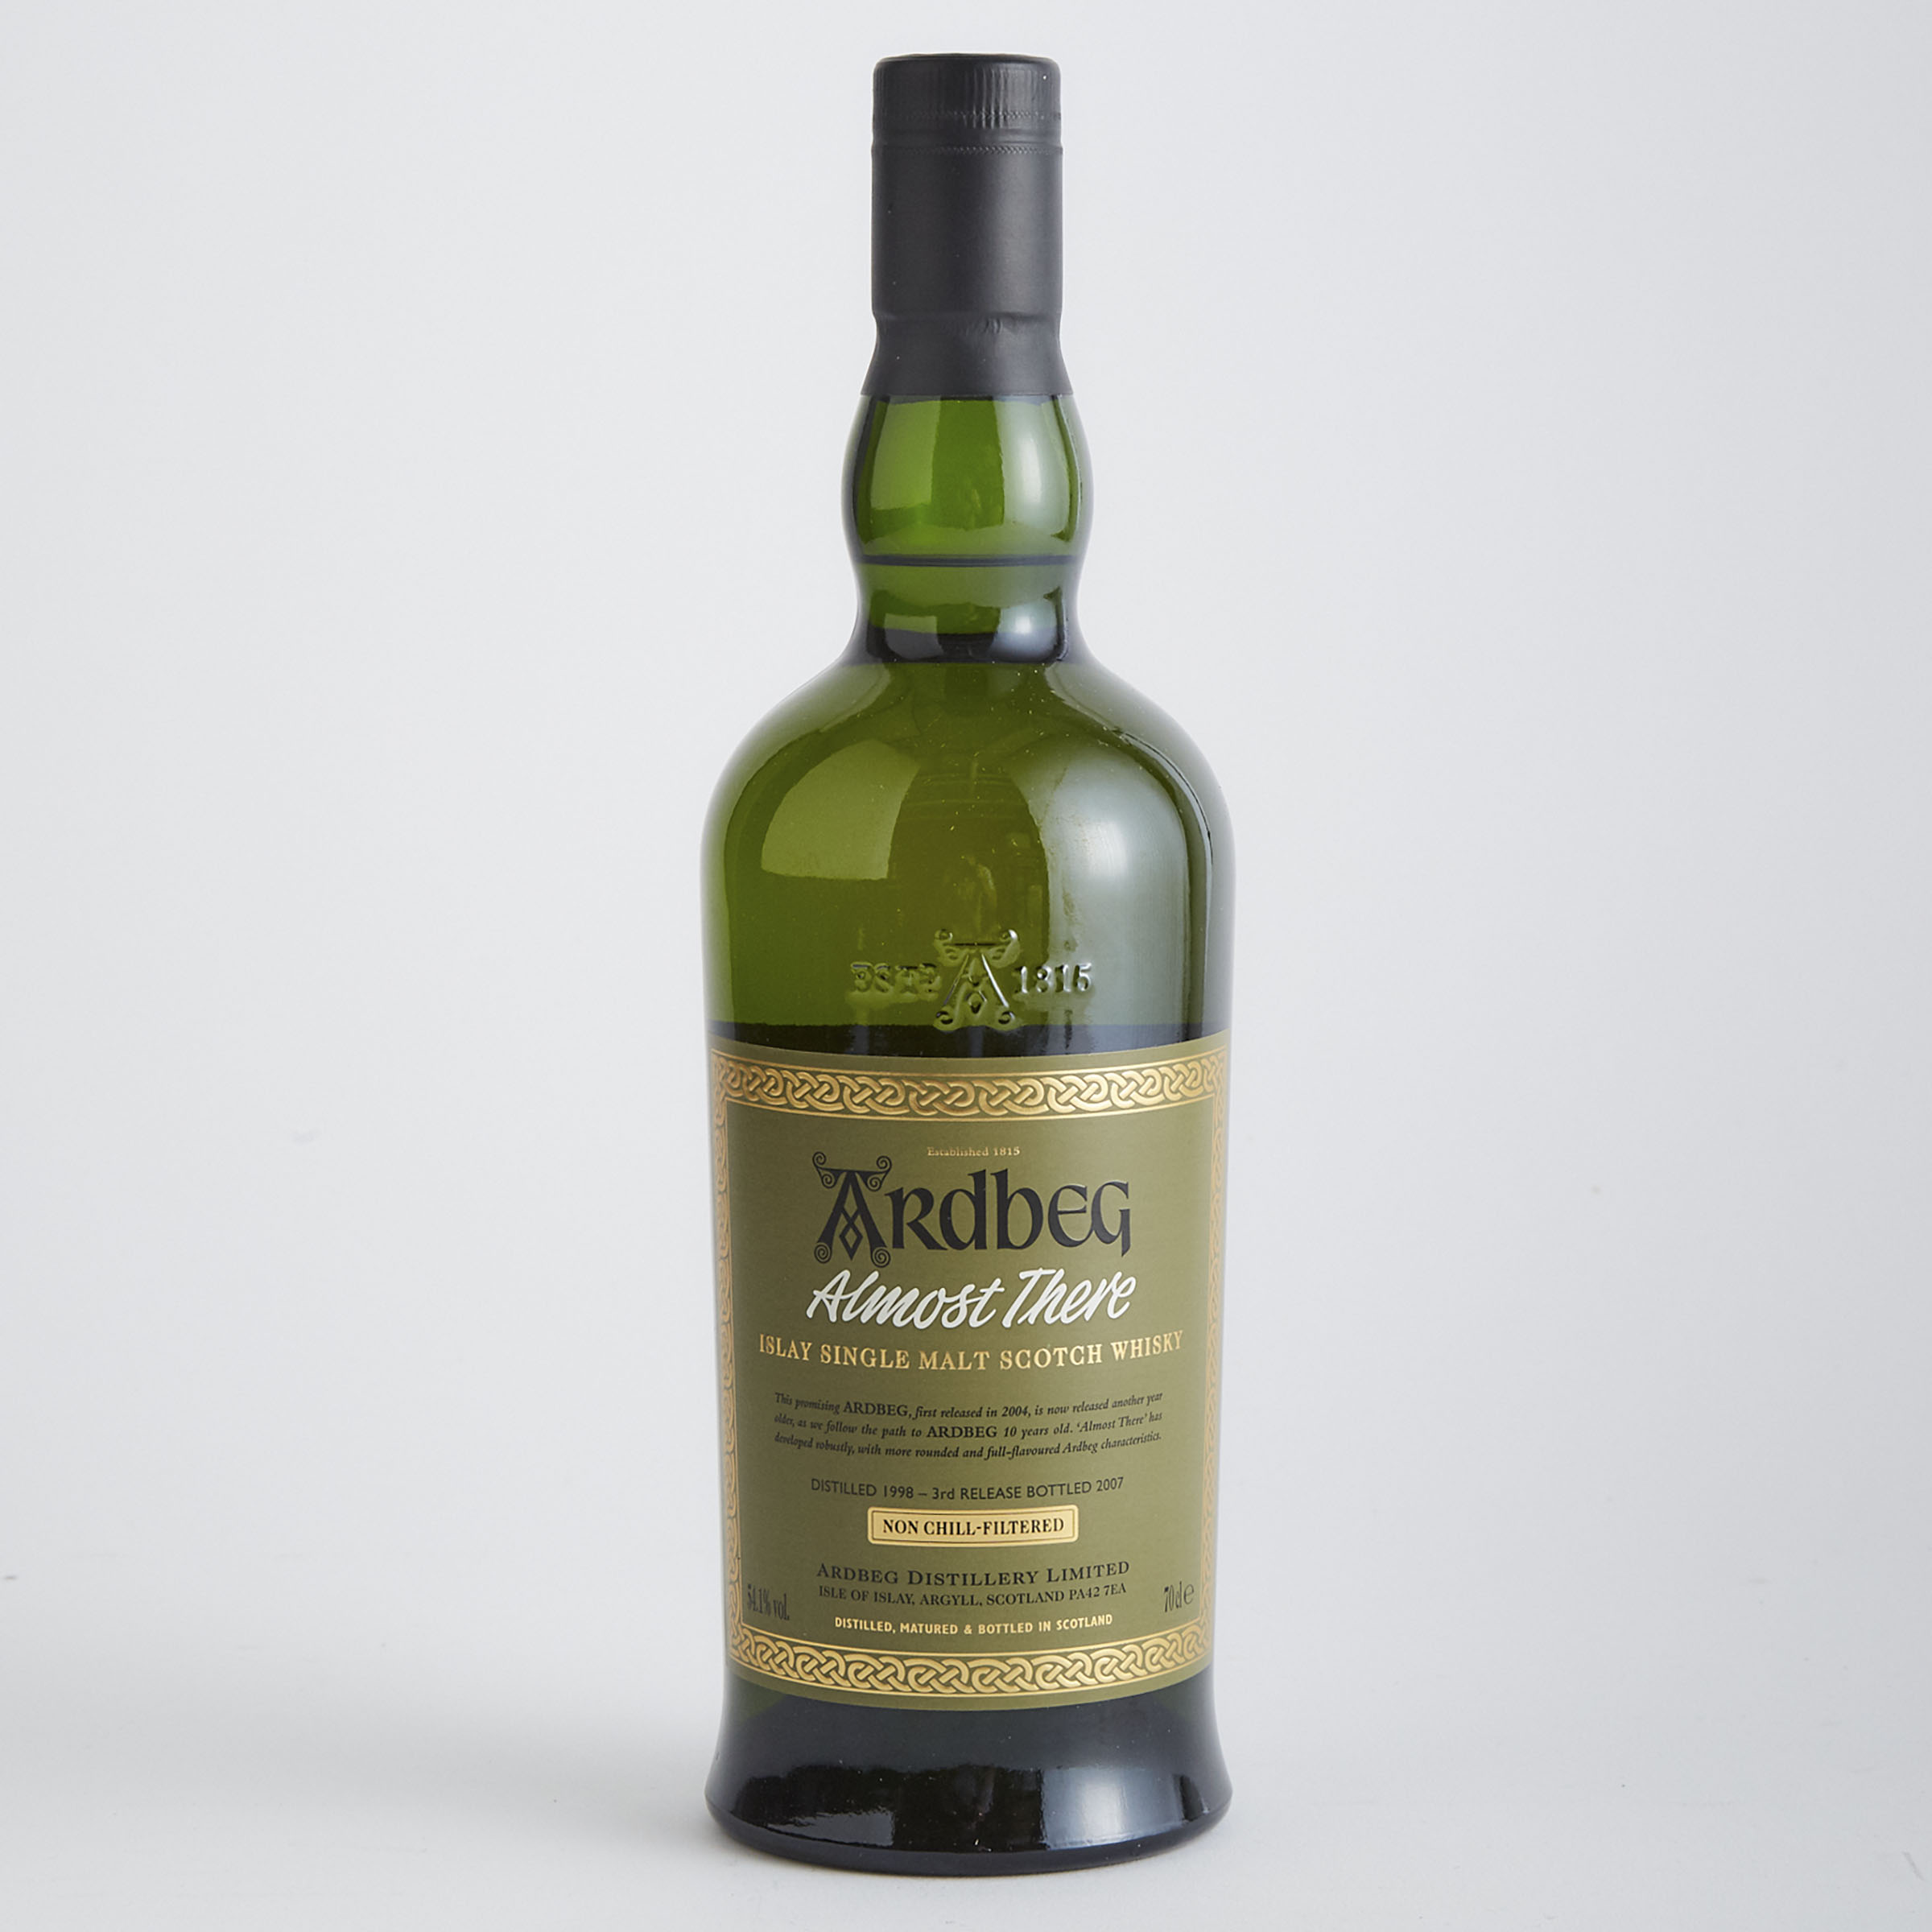 ARDBEG ALMOST THERE ISLAY SINGLE MALT SCOTCH WHISKY NAS (ONE 70 CL)